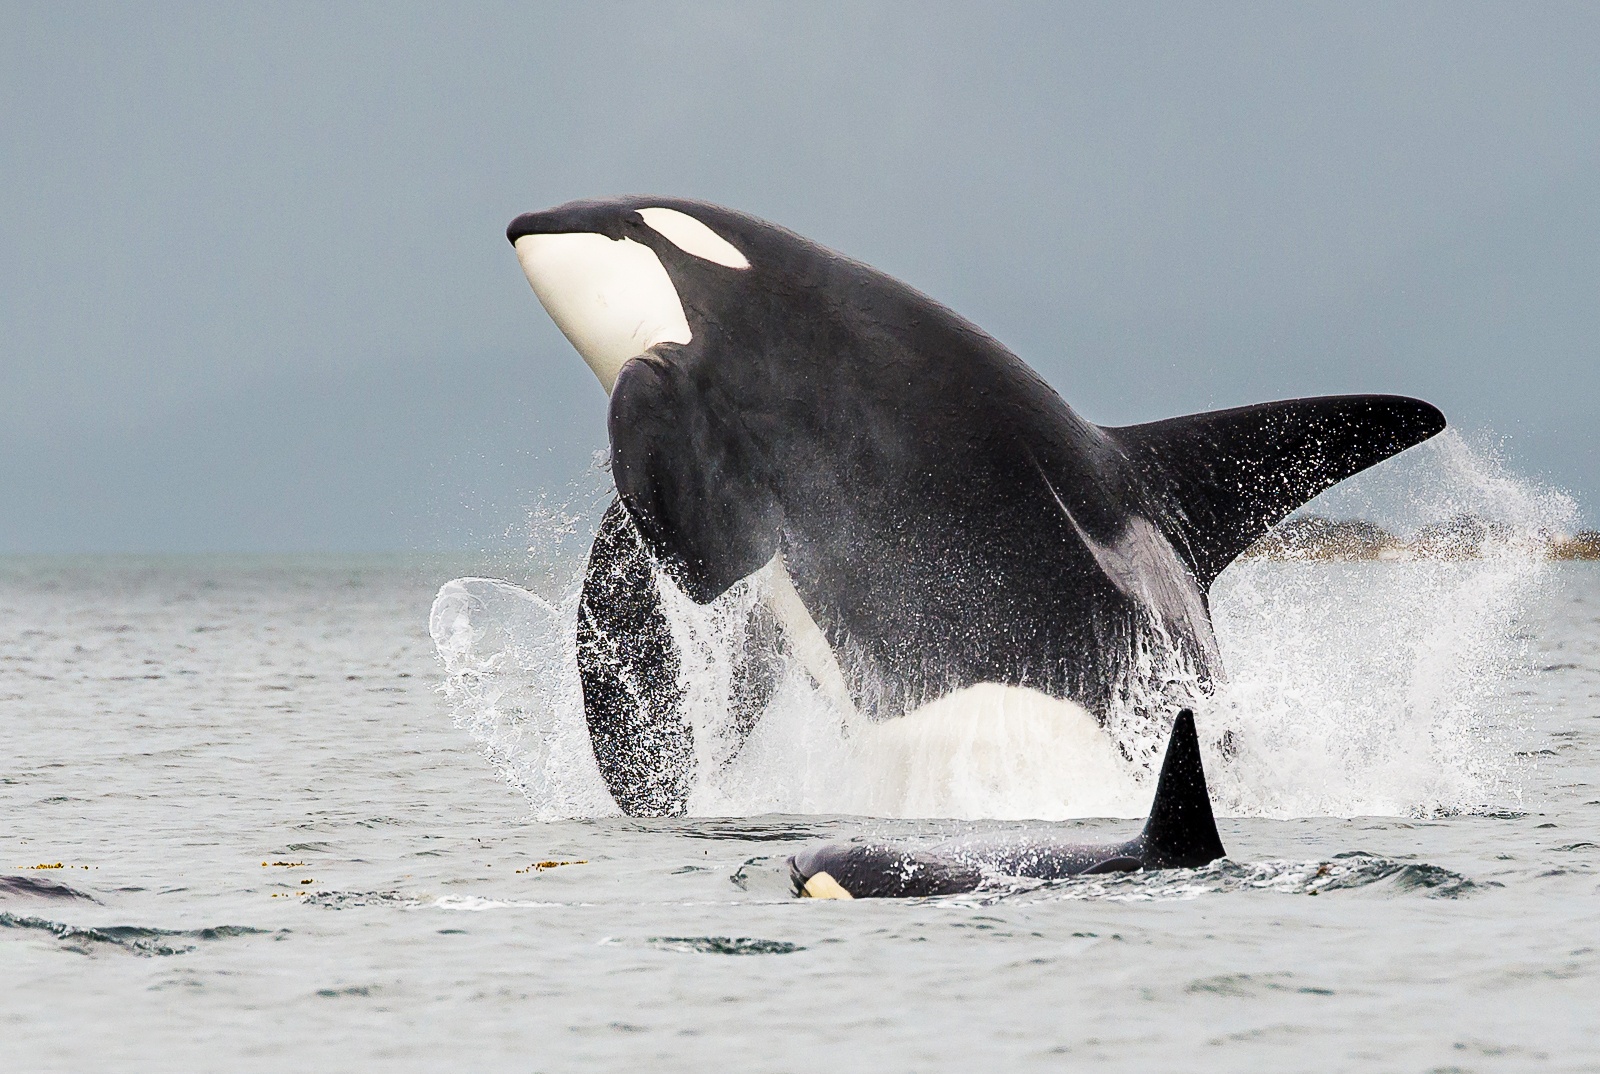 A large black and white orca dolphin emerges from the water.